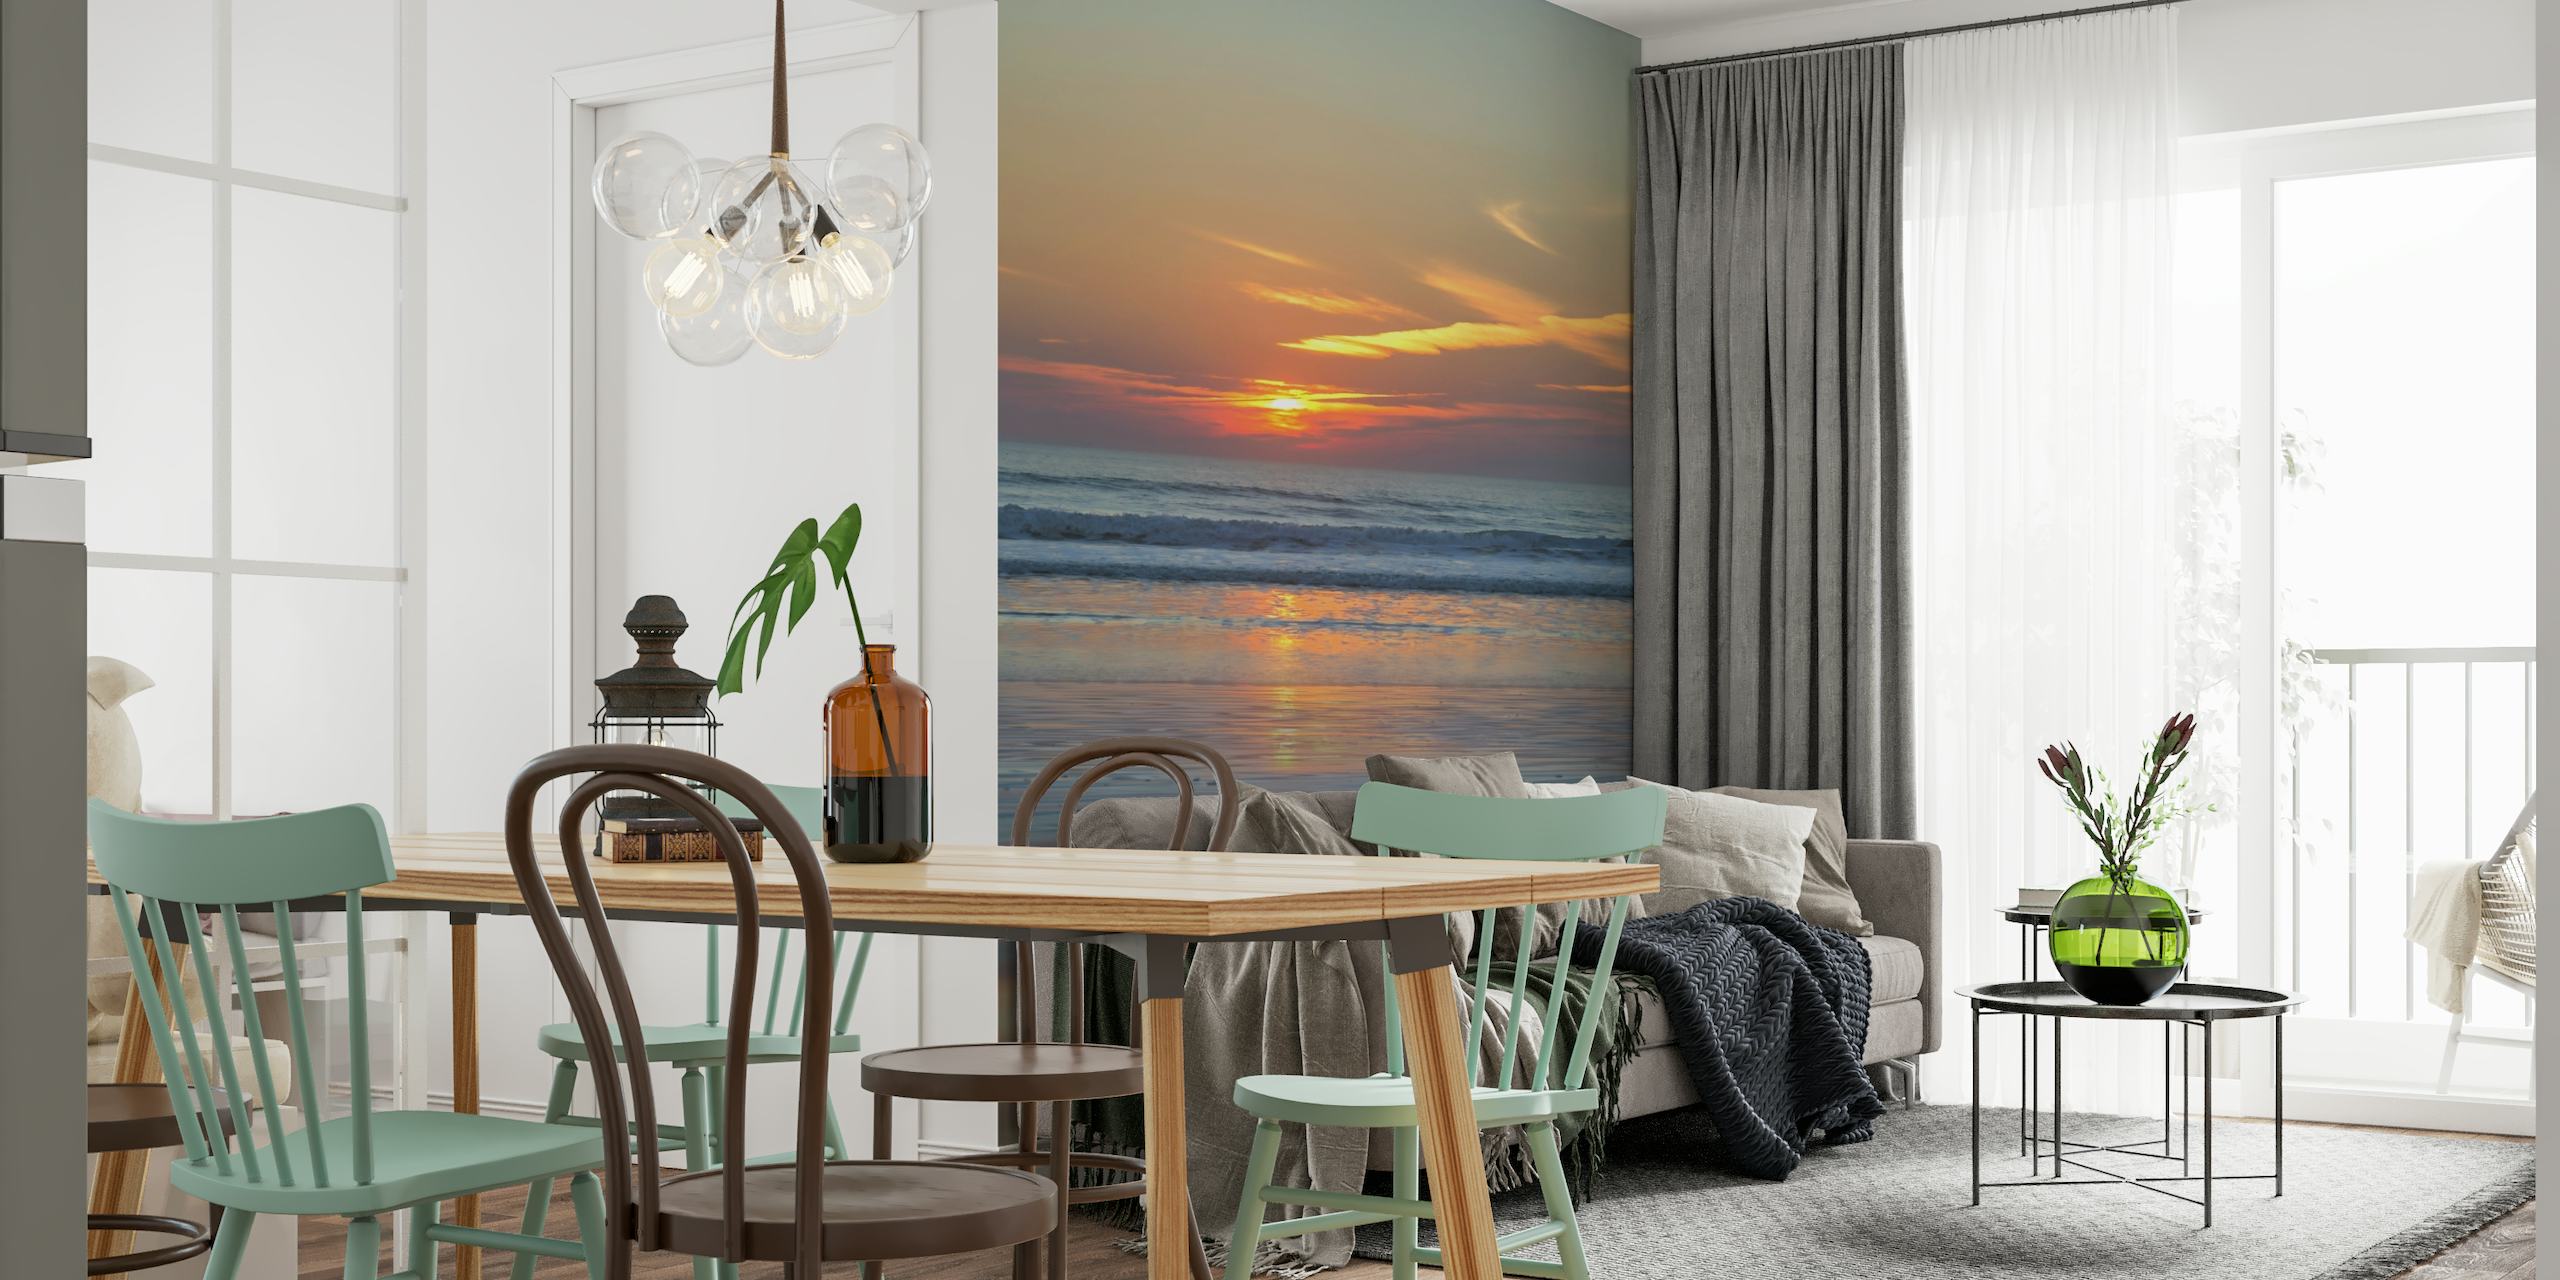 Andalusia sunset wall mural with ocean and reflection